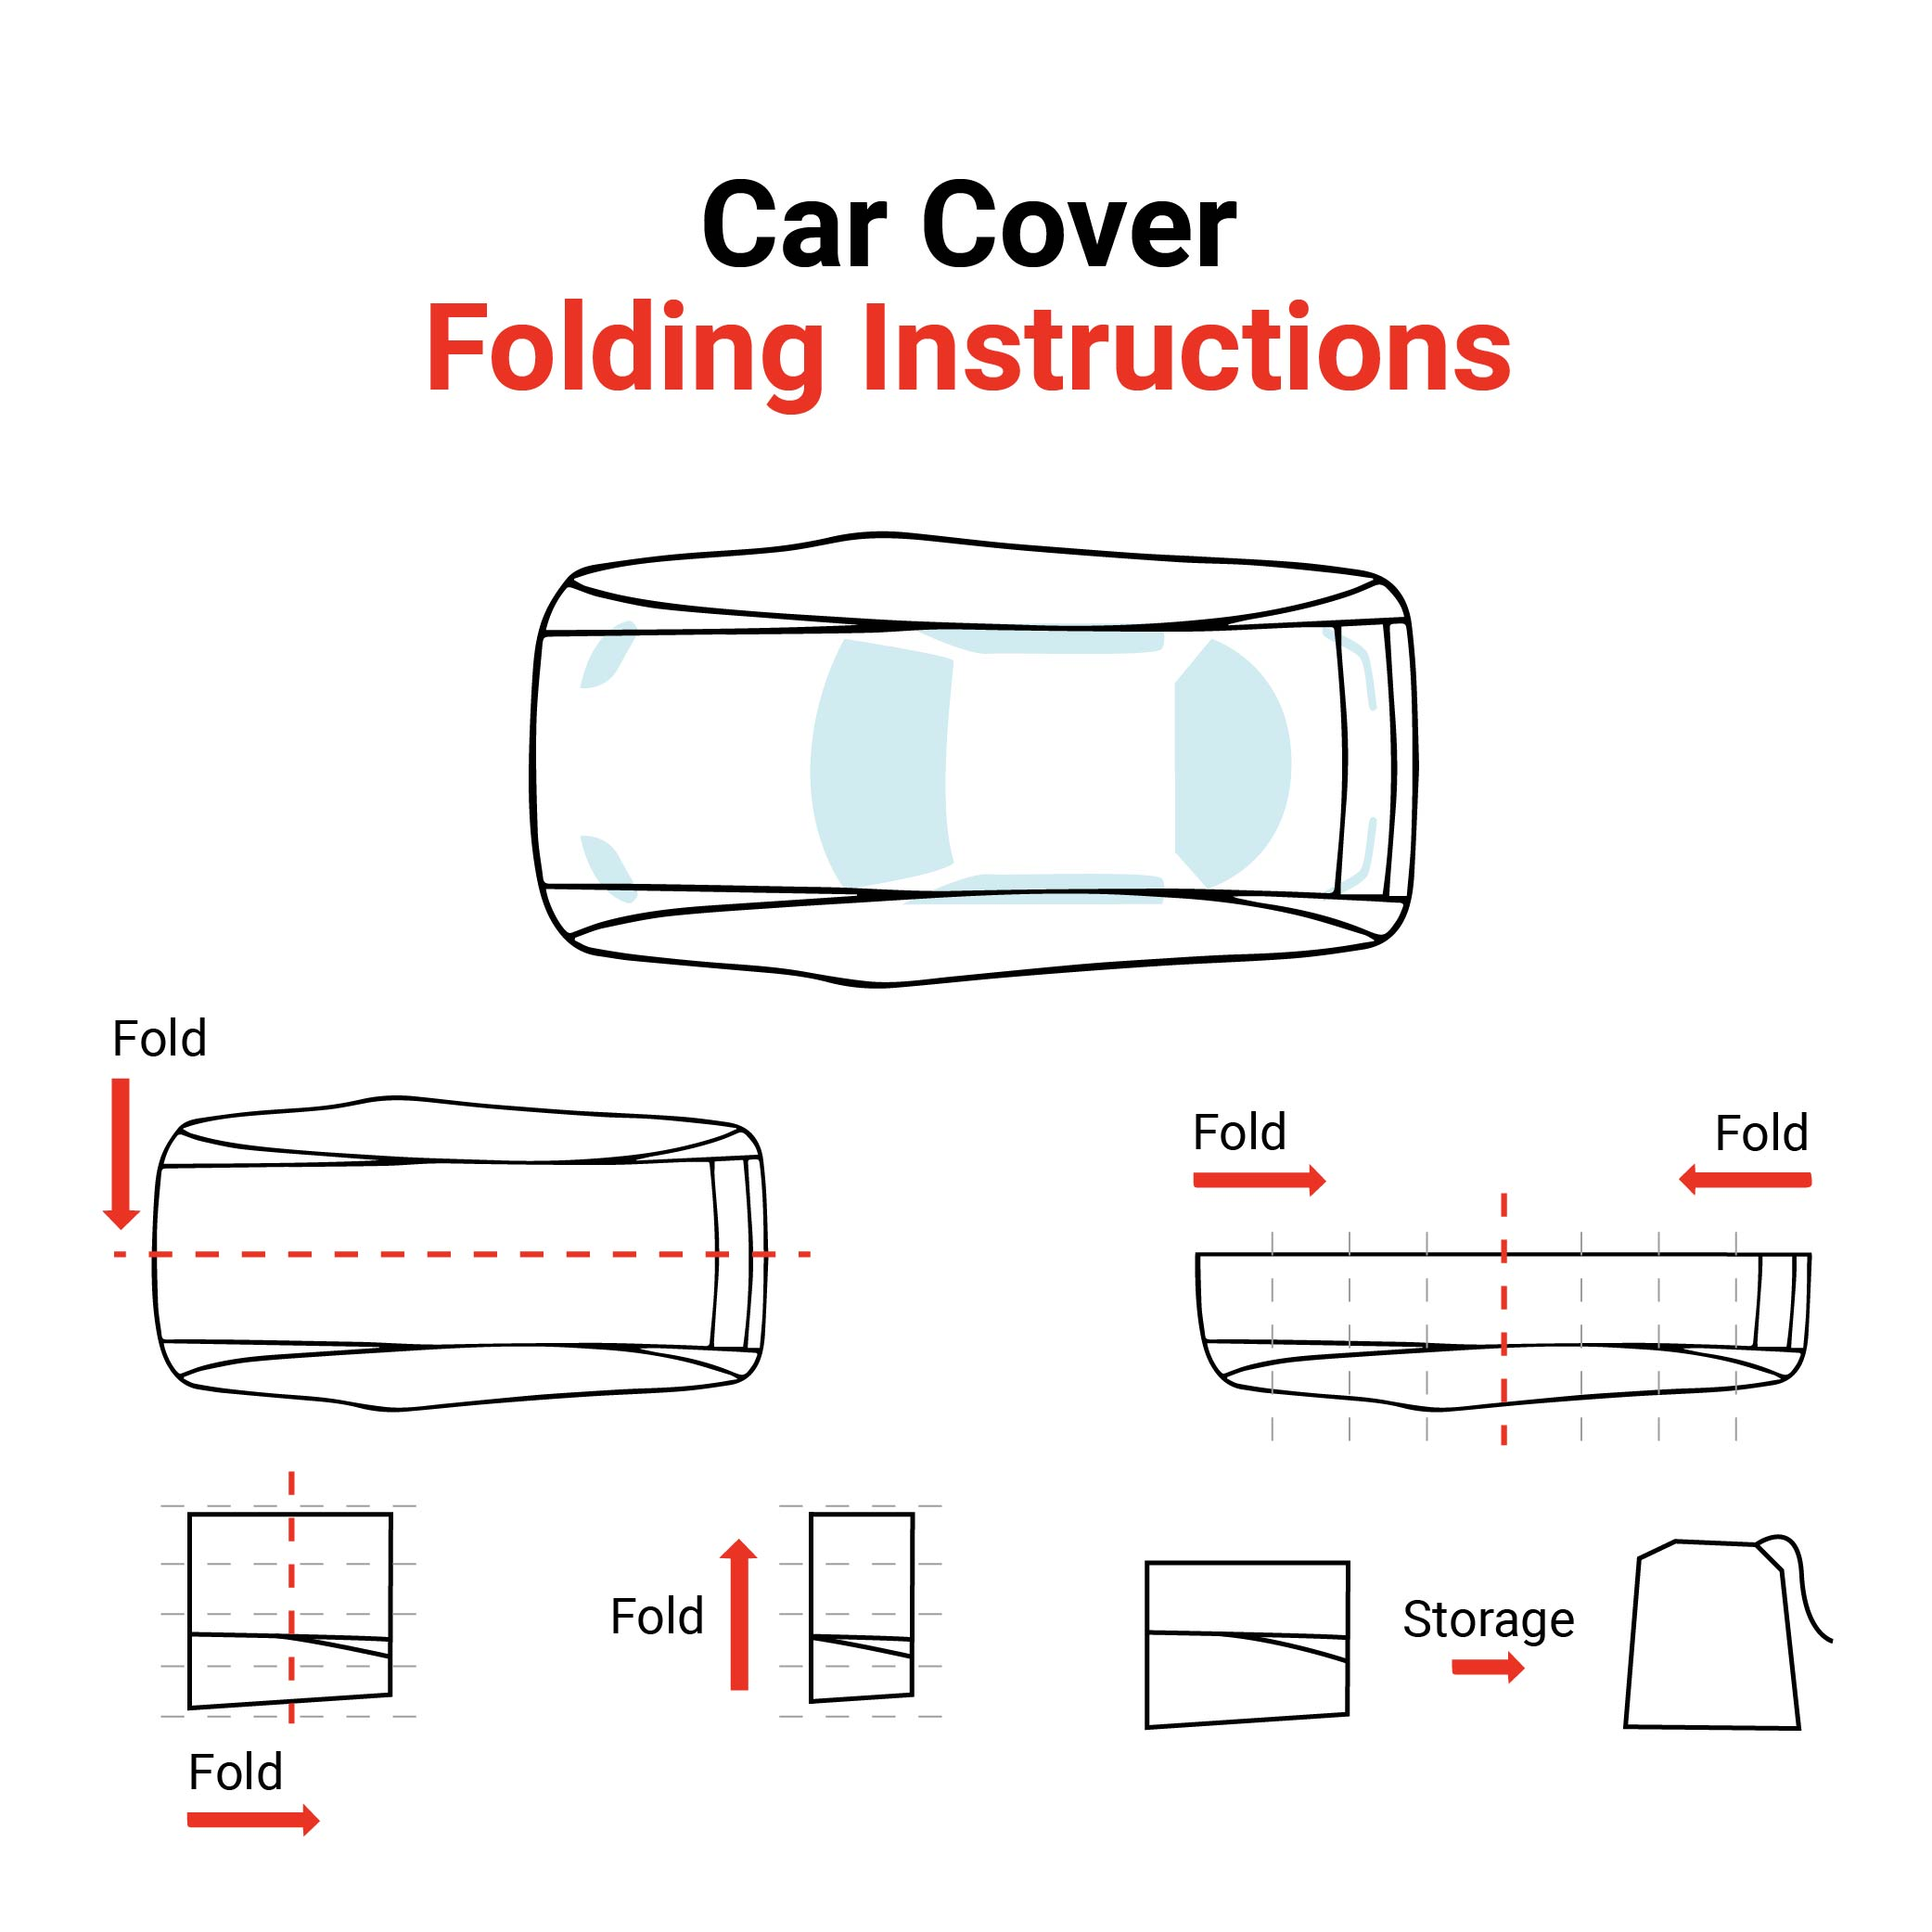 Polco Maruti Suzuki New Swift Car Body Cover with Antenna Cover, Mirror Pockets and 100% Water Repellent (Dupont Tyvek)